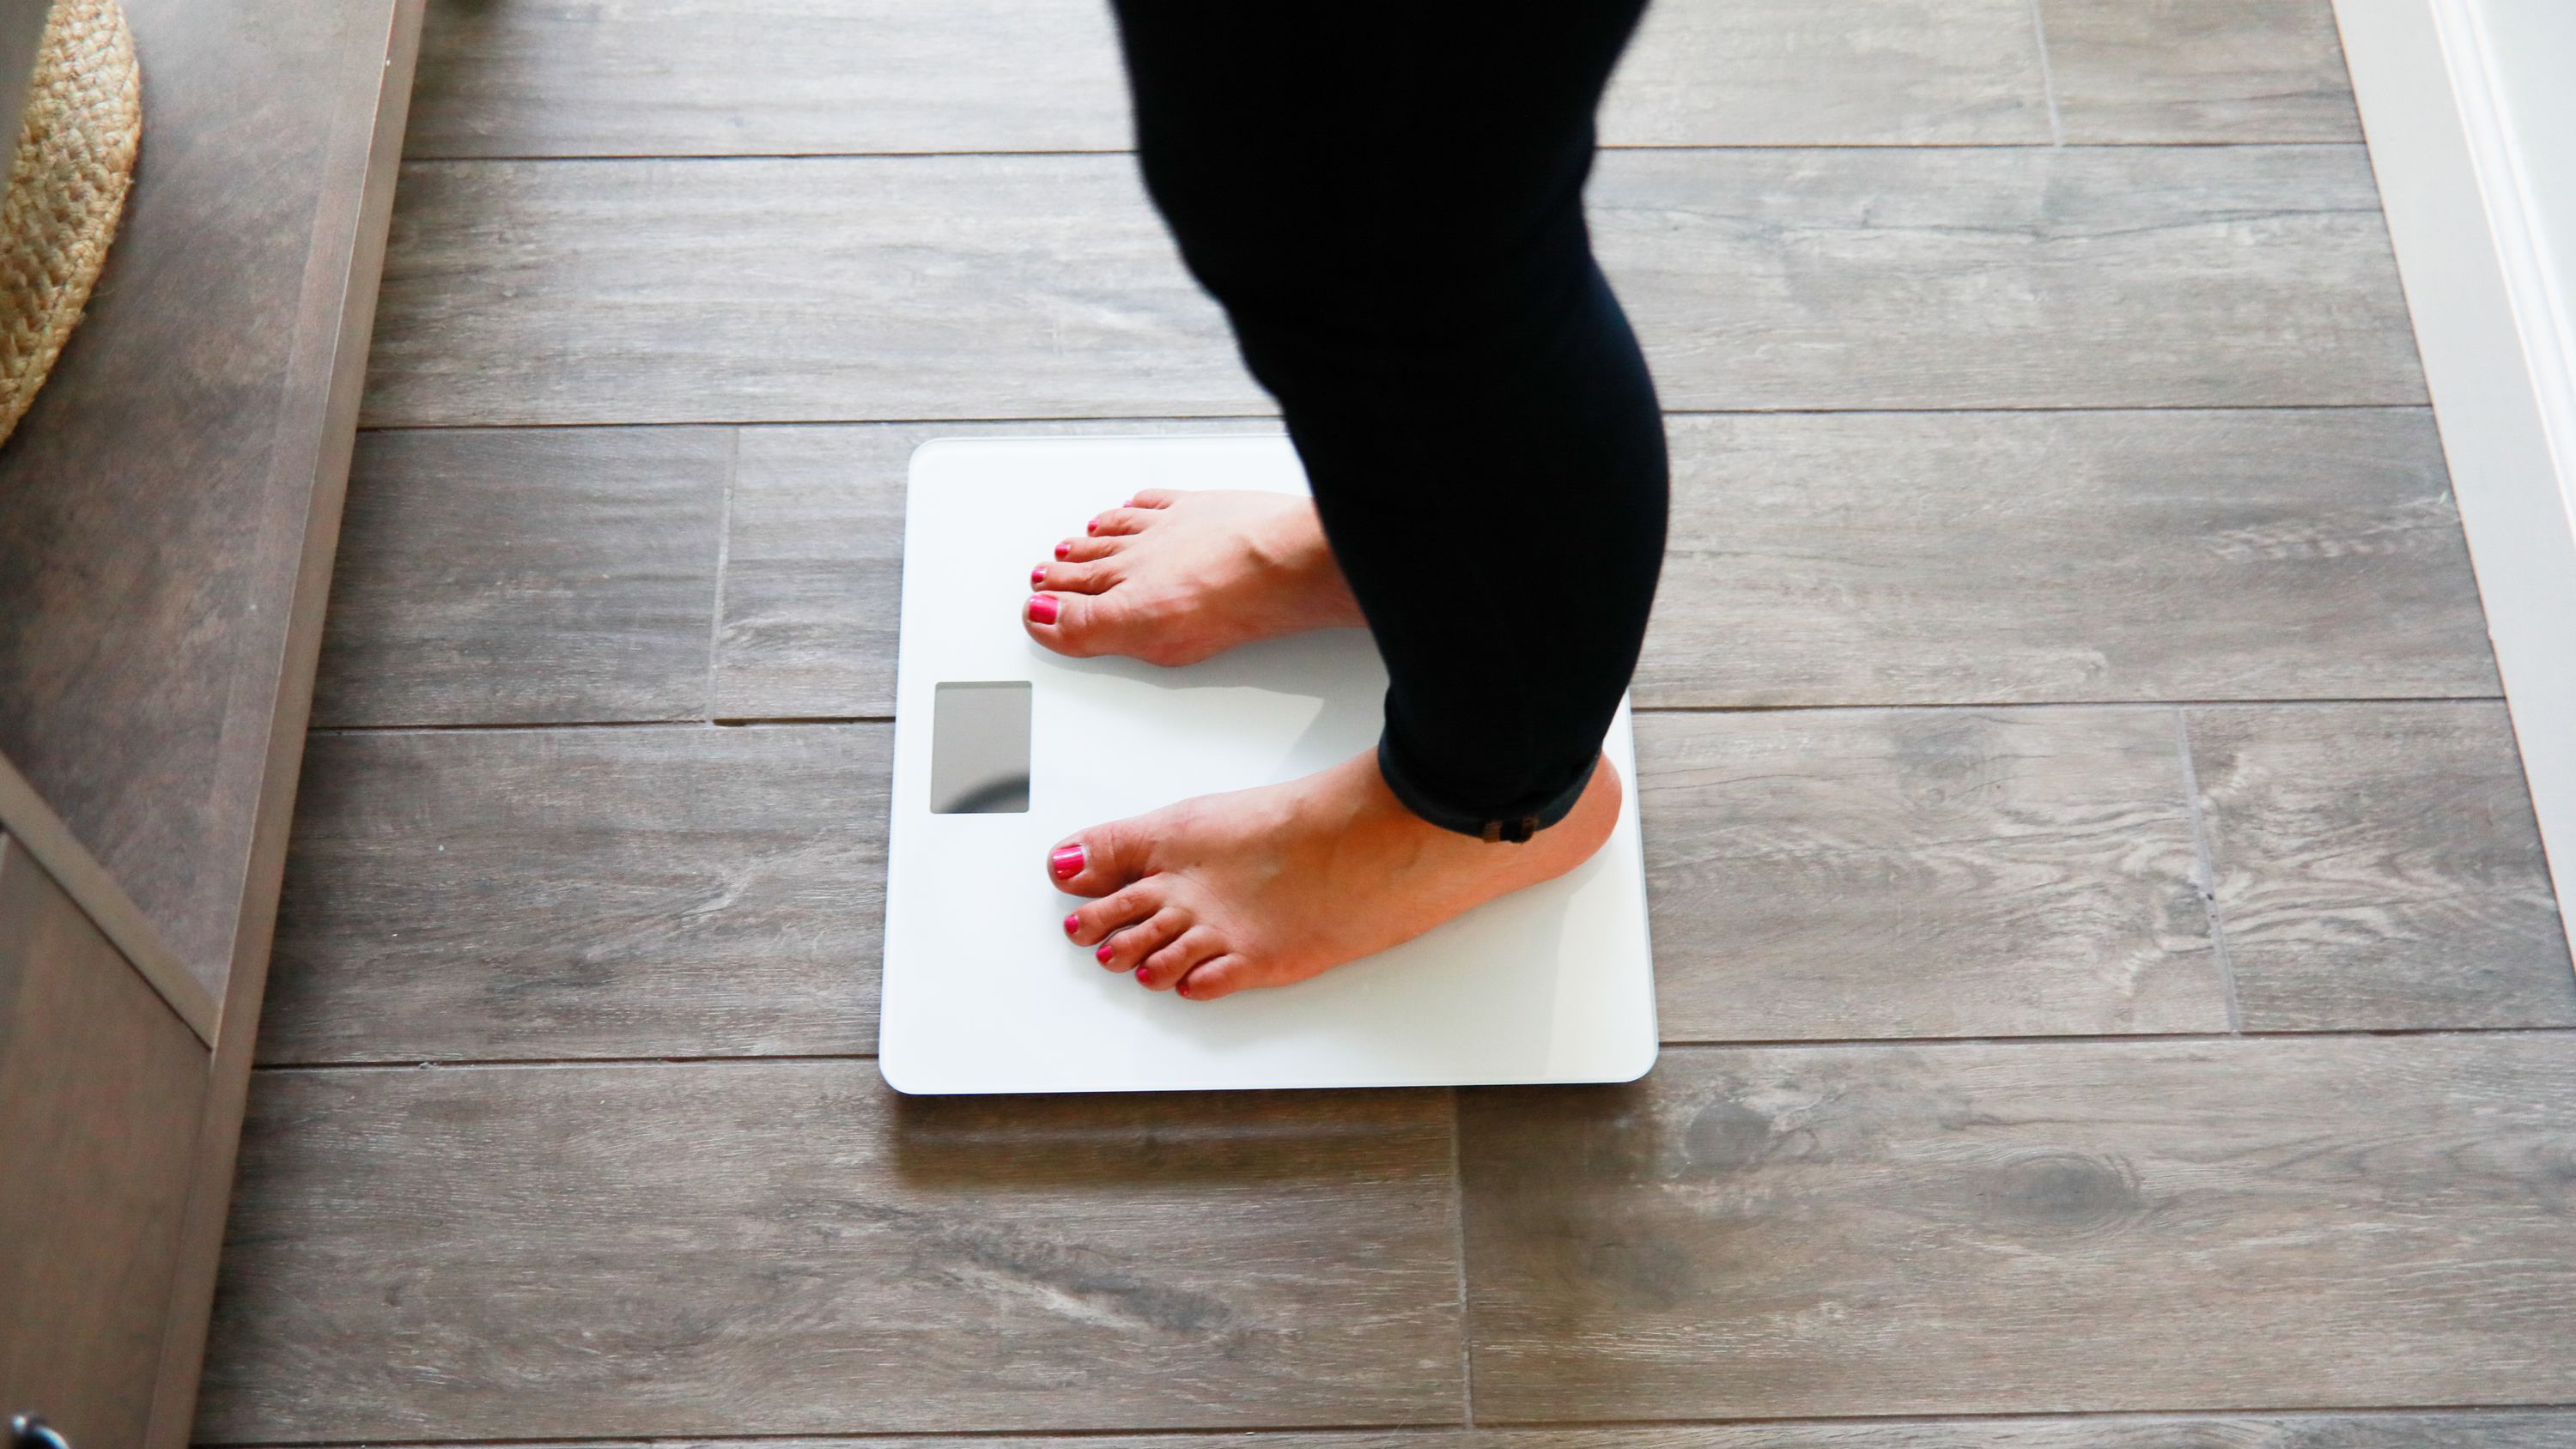 Tracks BMI Withings Body Wi-Fi Smart Scale Digital Weight Bathroom Scales. 